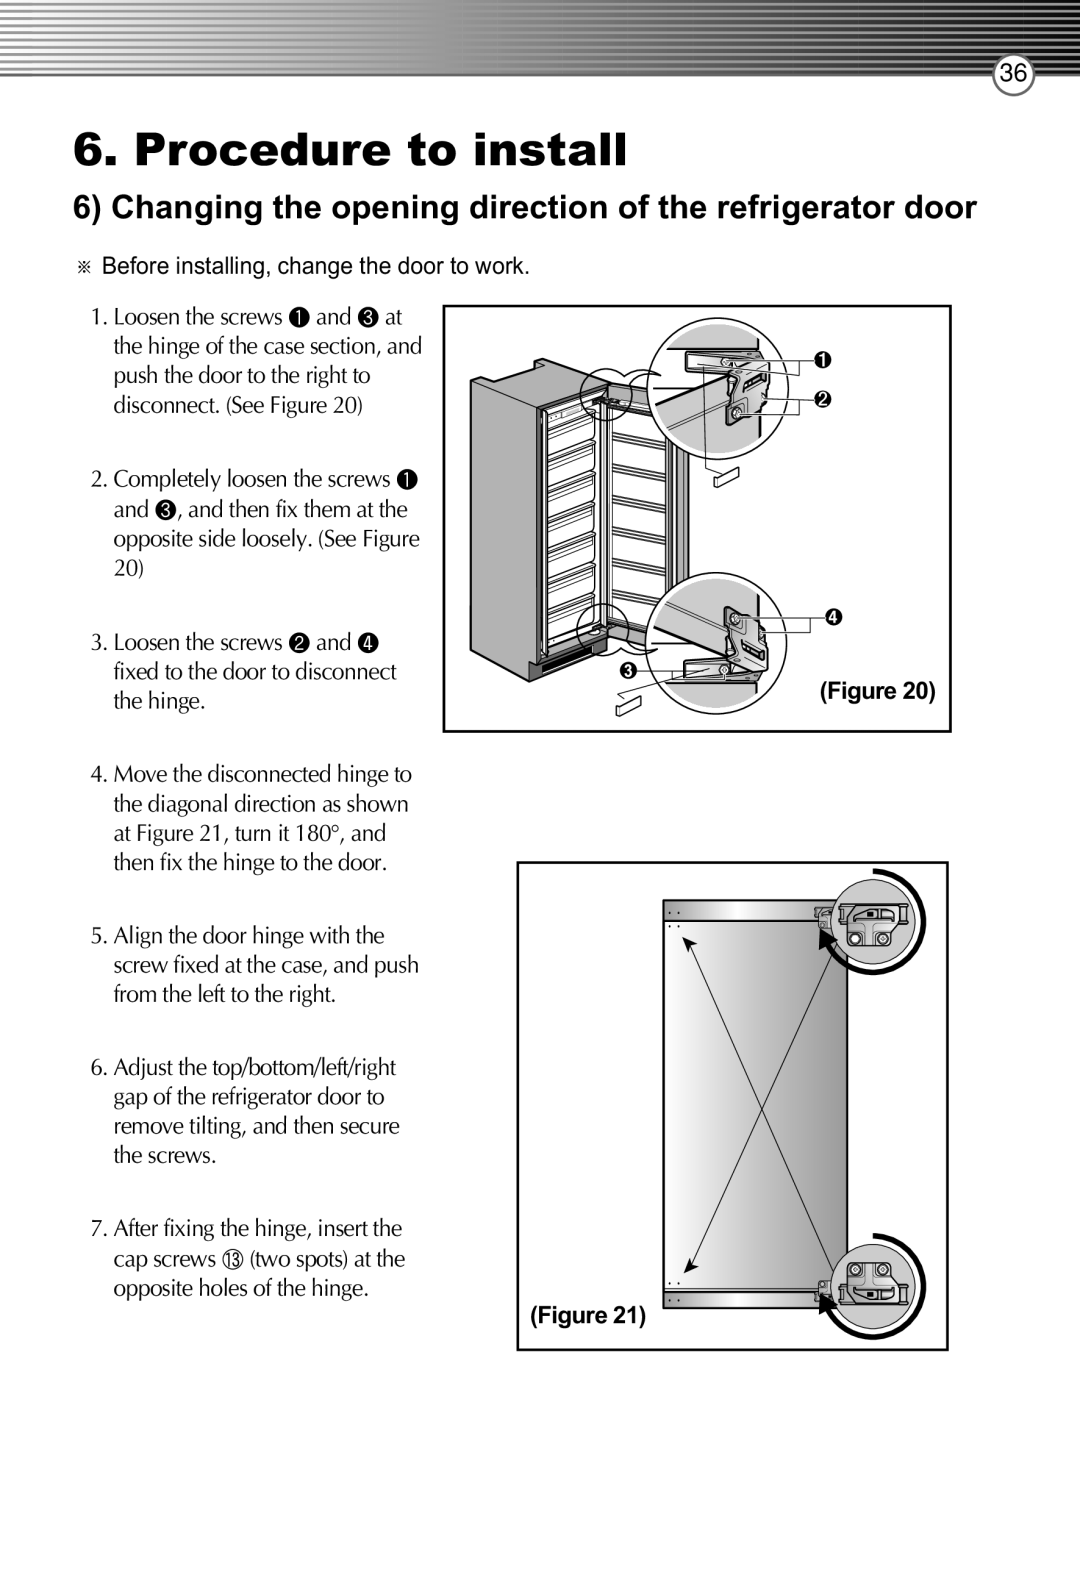 Smeg LB30AFNF manual Procedure to install, Before installing, change the door to work, After fixing the hinge, insert the 